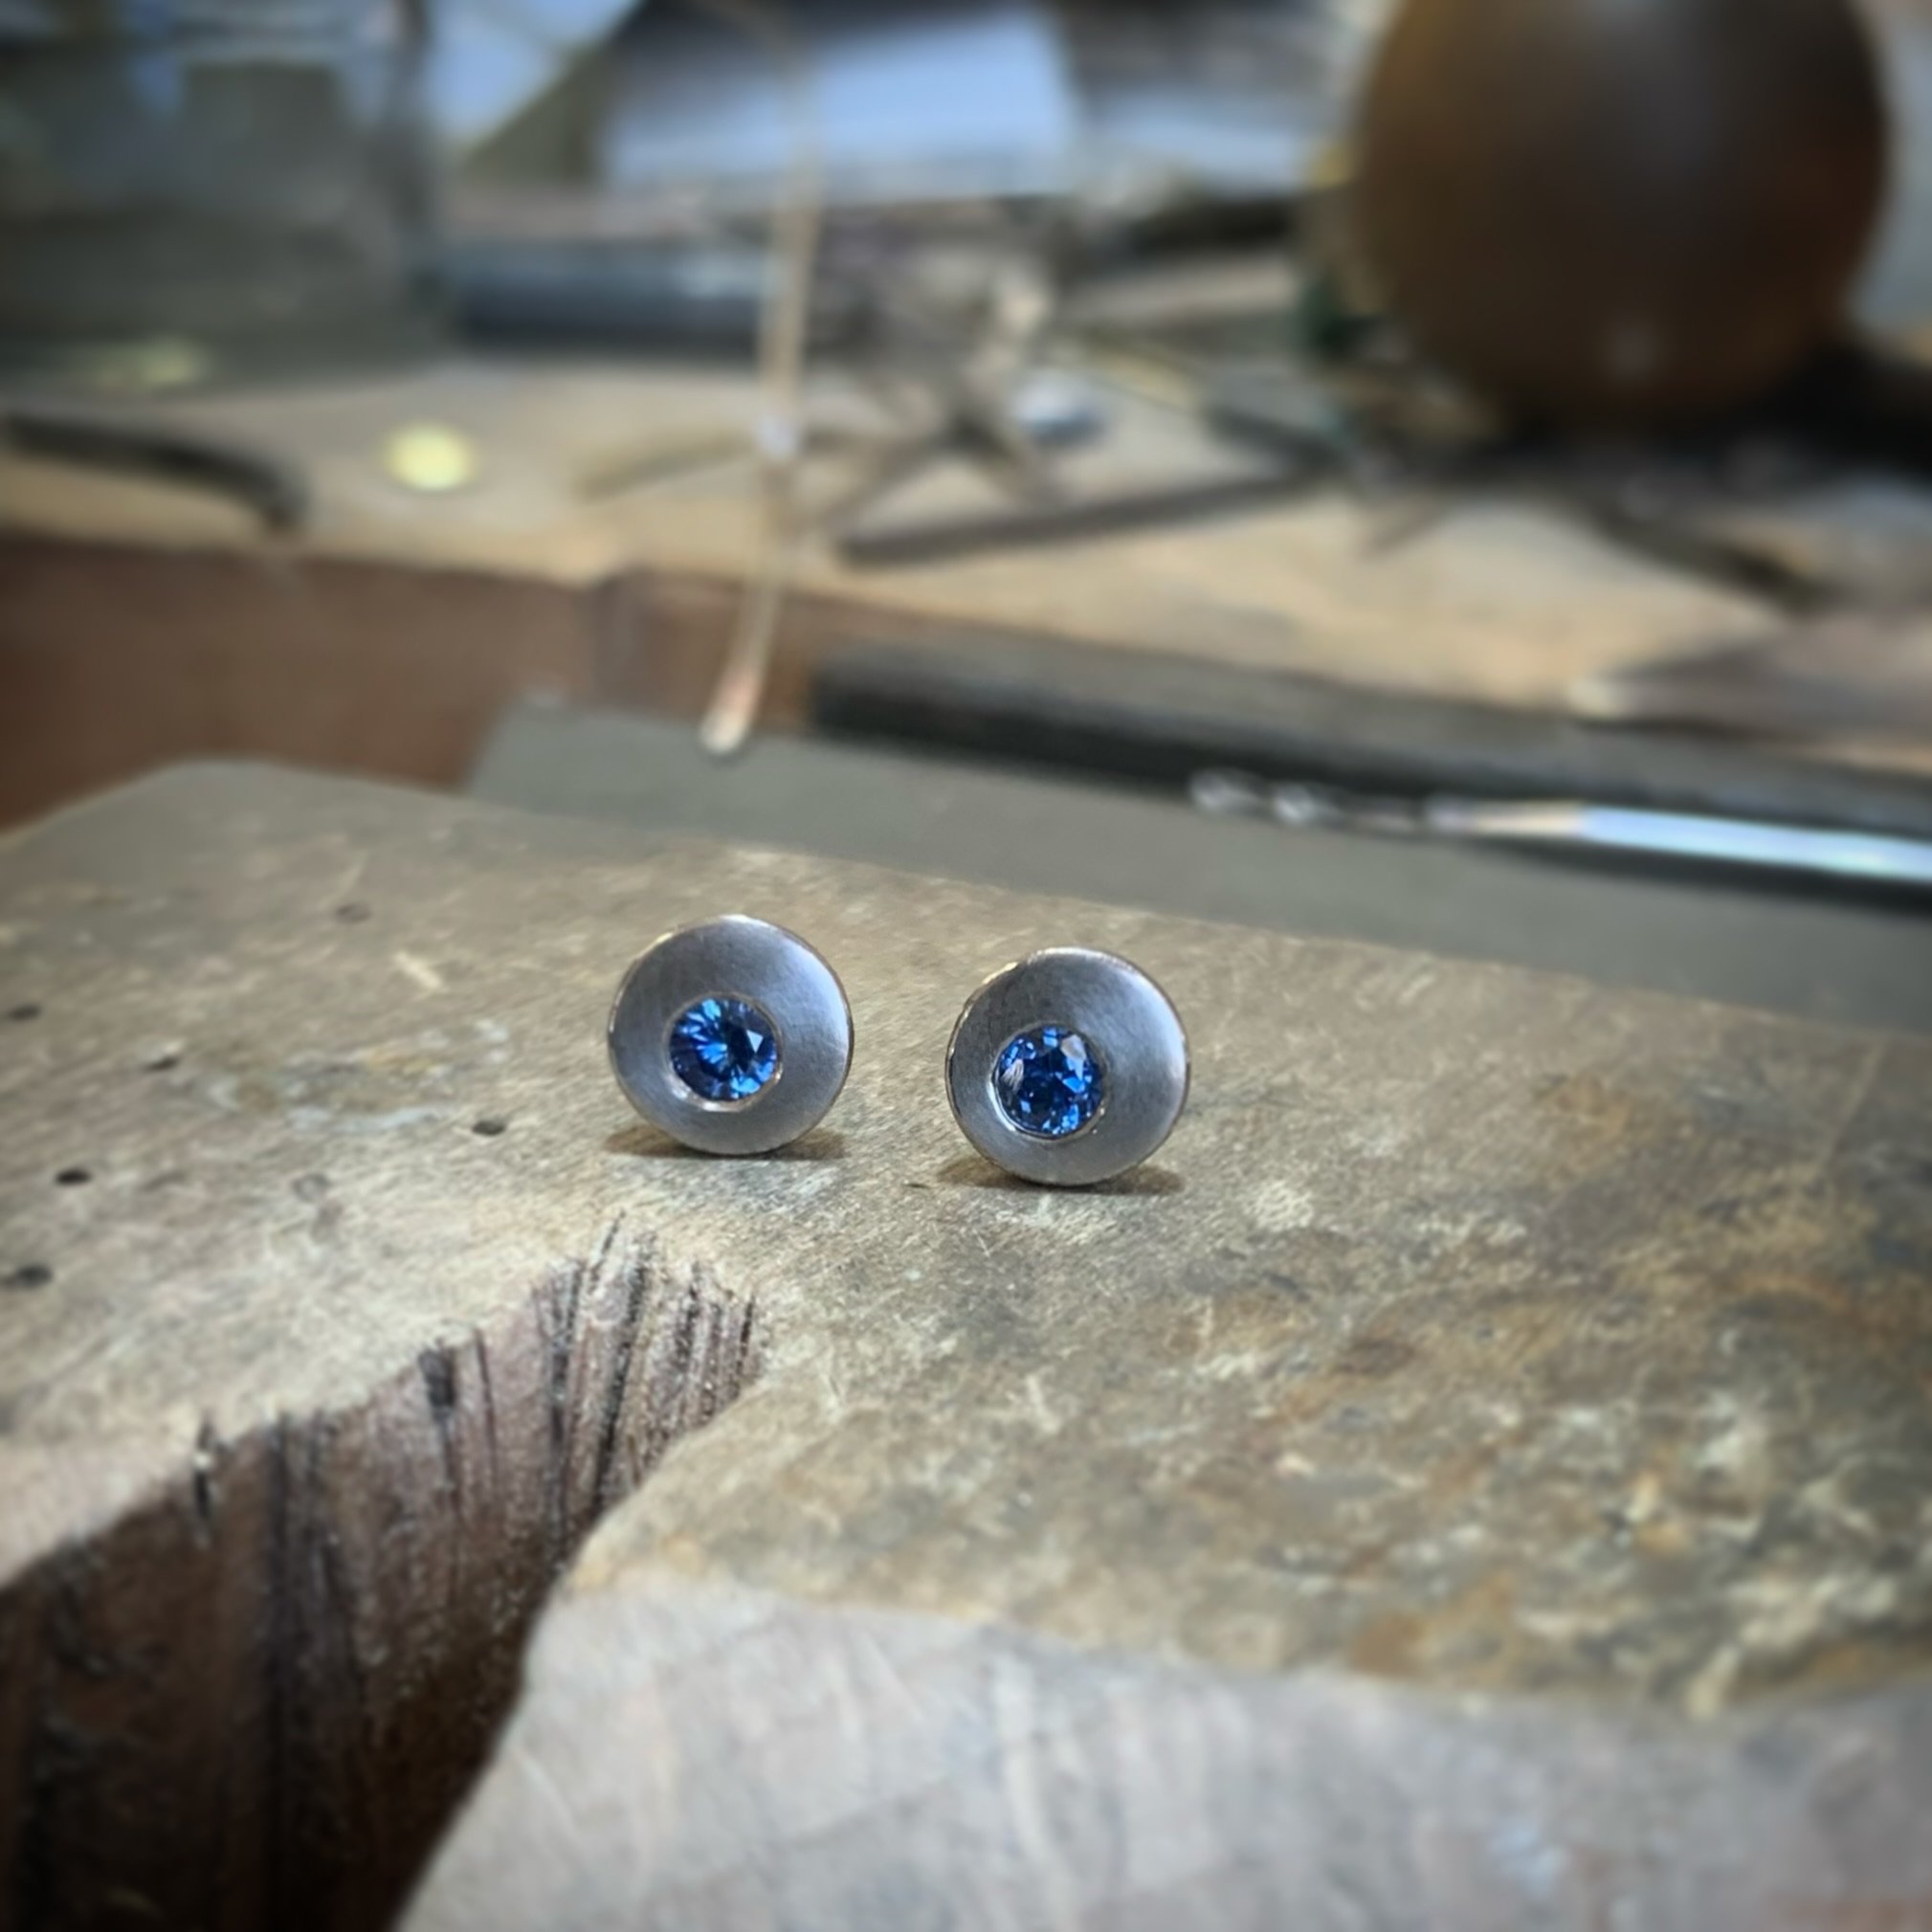 Sweet little palladium and sapphire studs all ready to Rock&rsquo;n&rsquo;Roll down to @craftinfocus at RHS Wisley this coming week 💥 2 - 6 May, be there or be ▫️
.
.
.
.
.
.
#amorajoyas #jewellery #jewelry #contemporaryjewellery #sapphirestudearrin